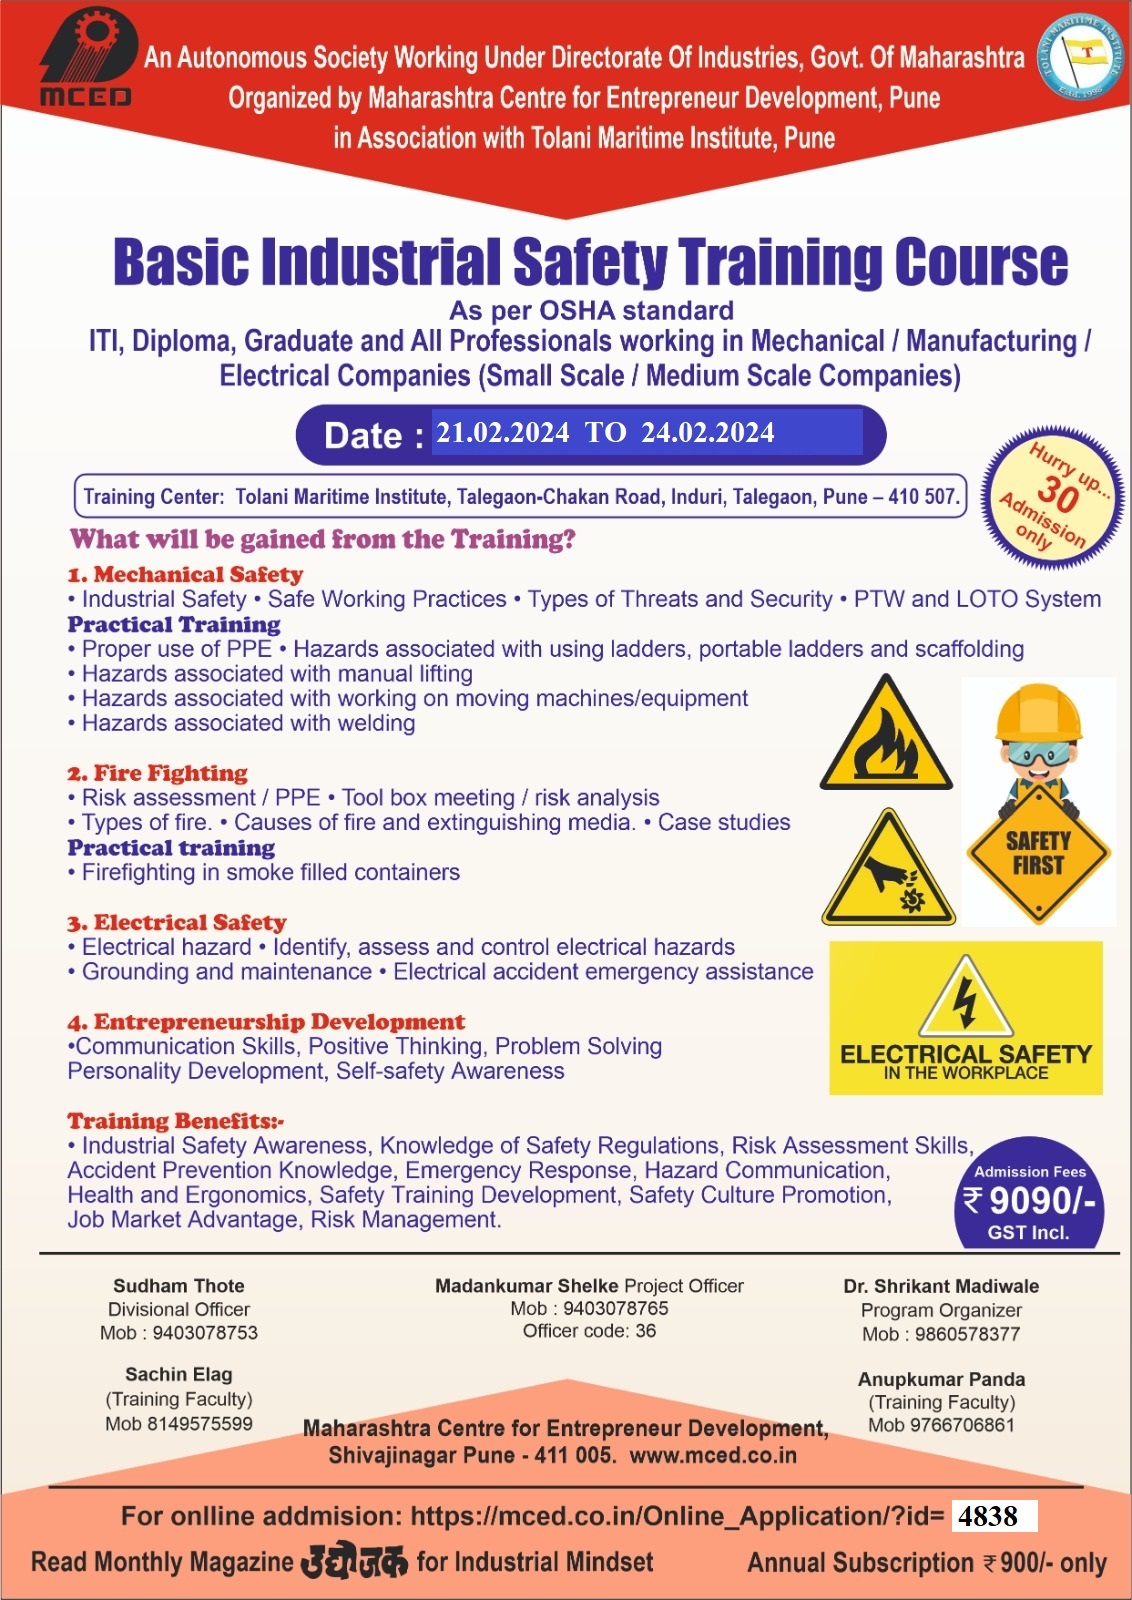 Basic Industrial Safety Training Course